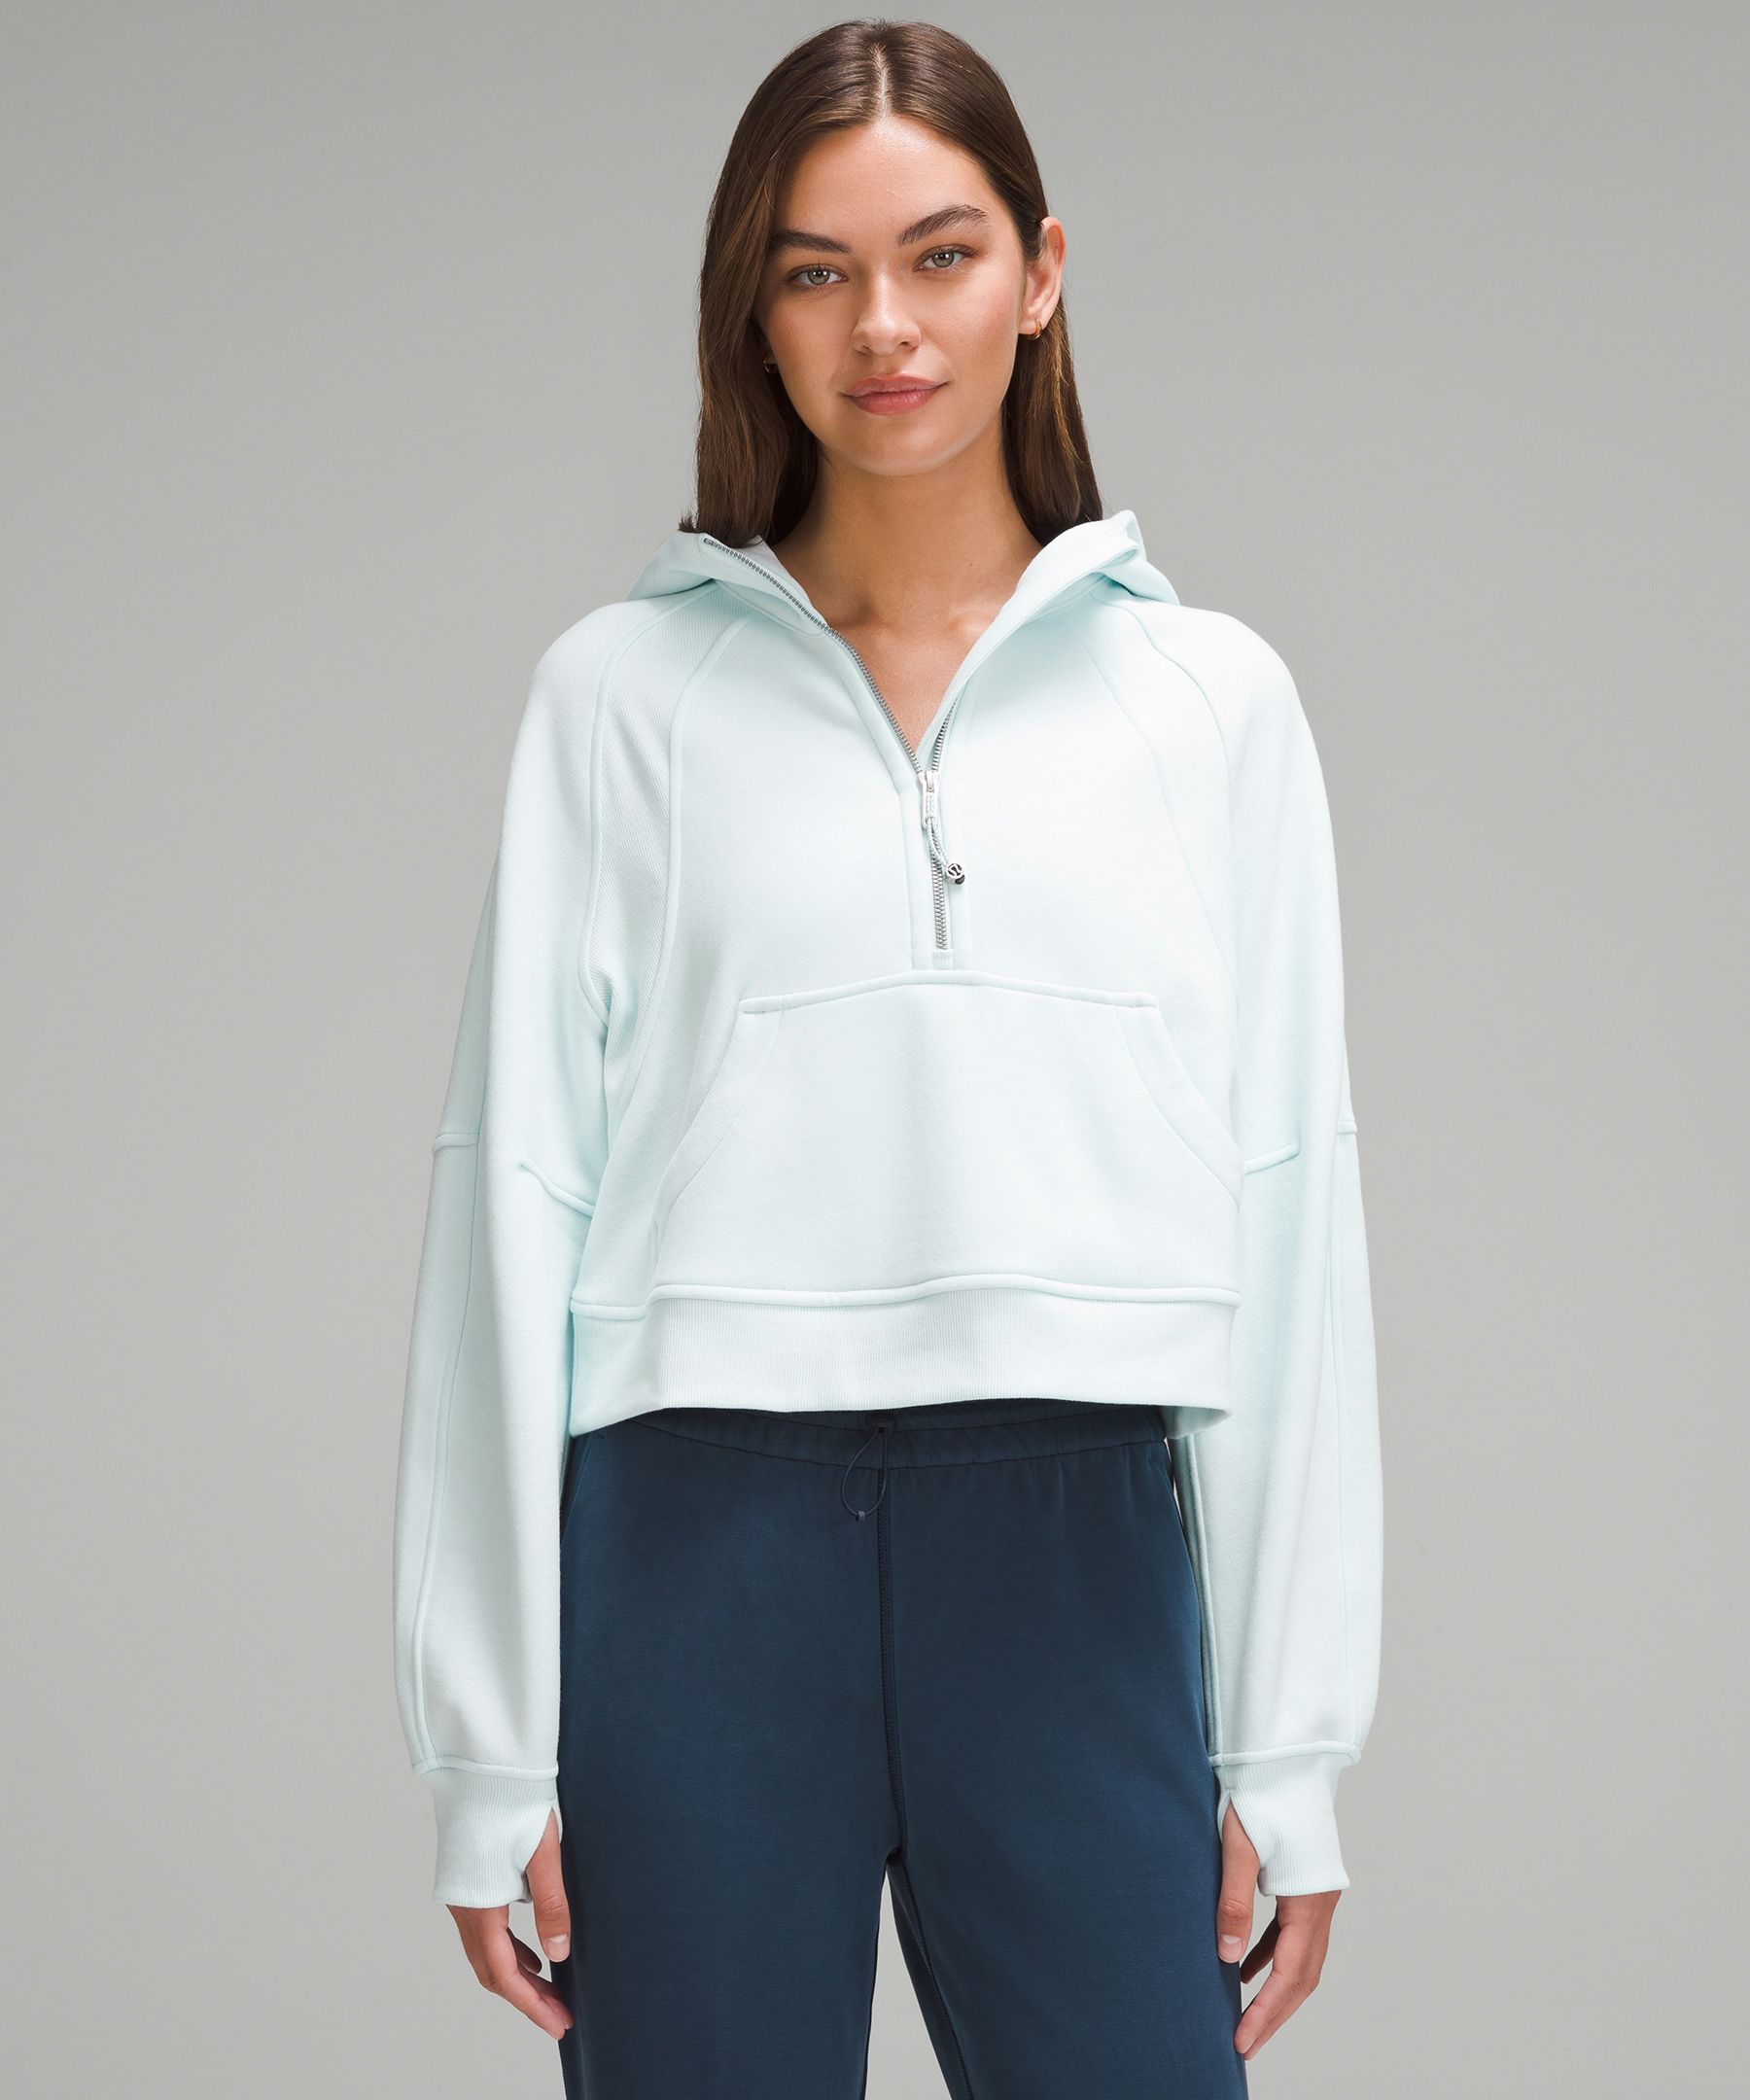 Shoppers Are Obsessed With This Lululemon Scuba Hoodie Lookalike